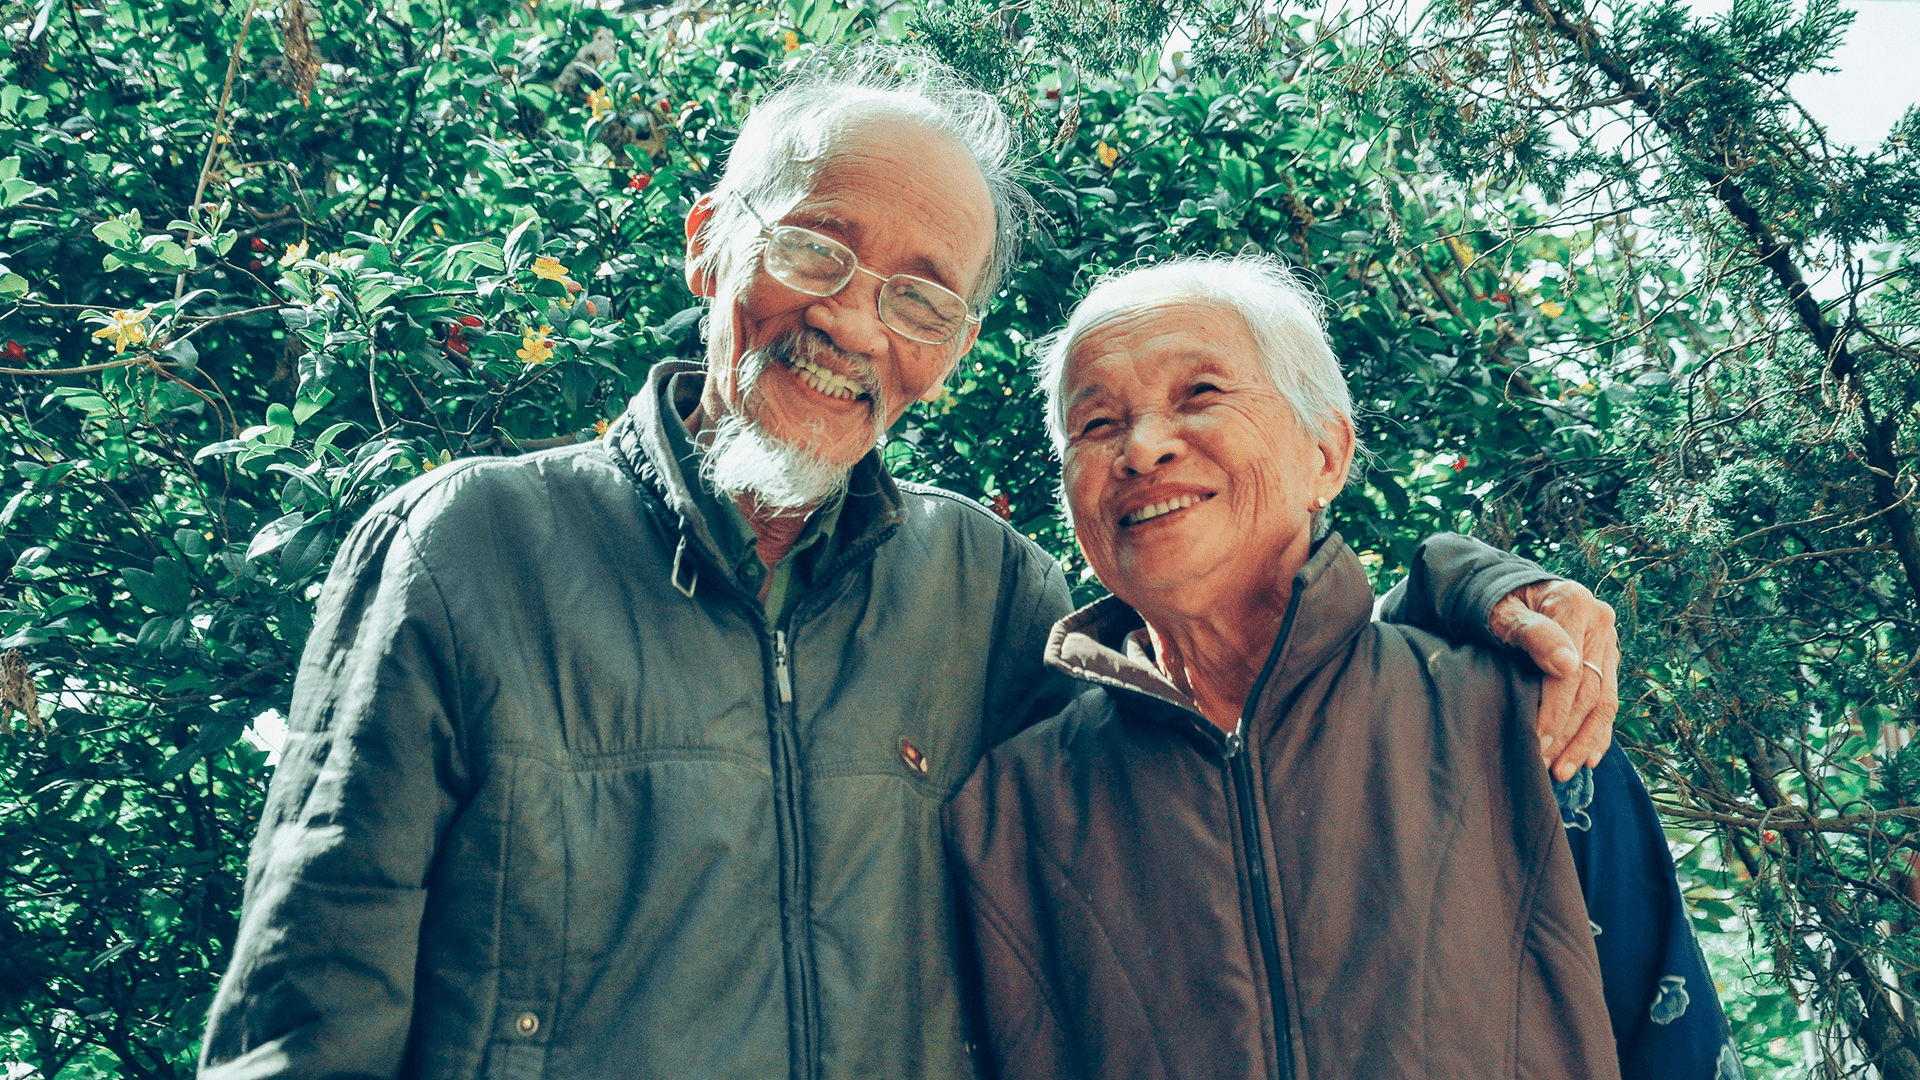 A senior man and woman smiling in a garden